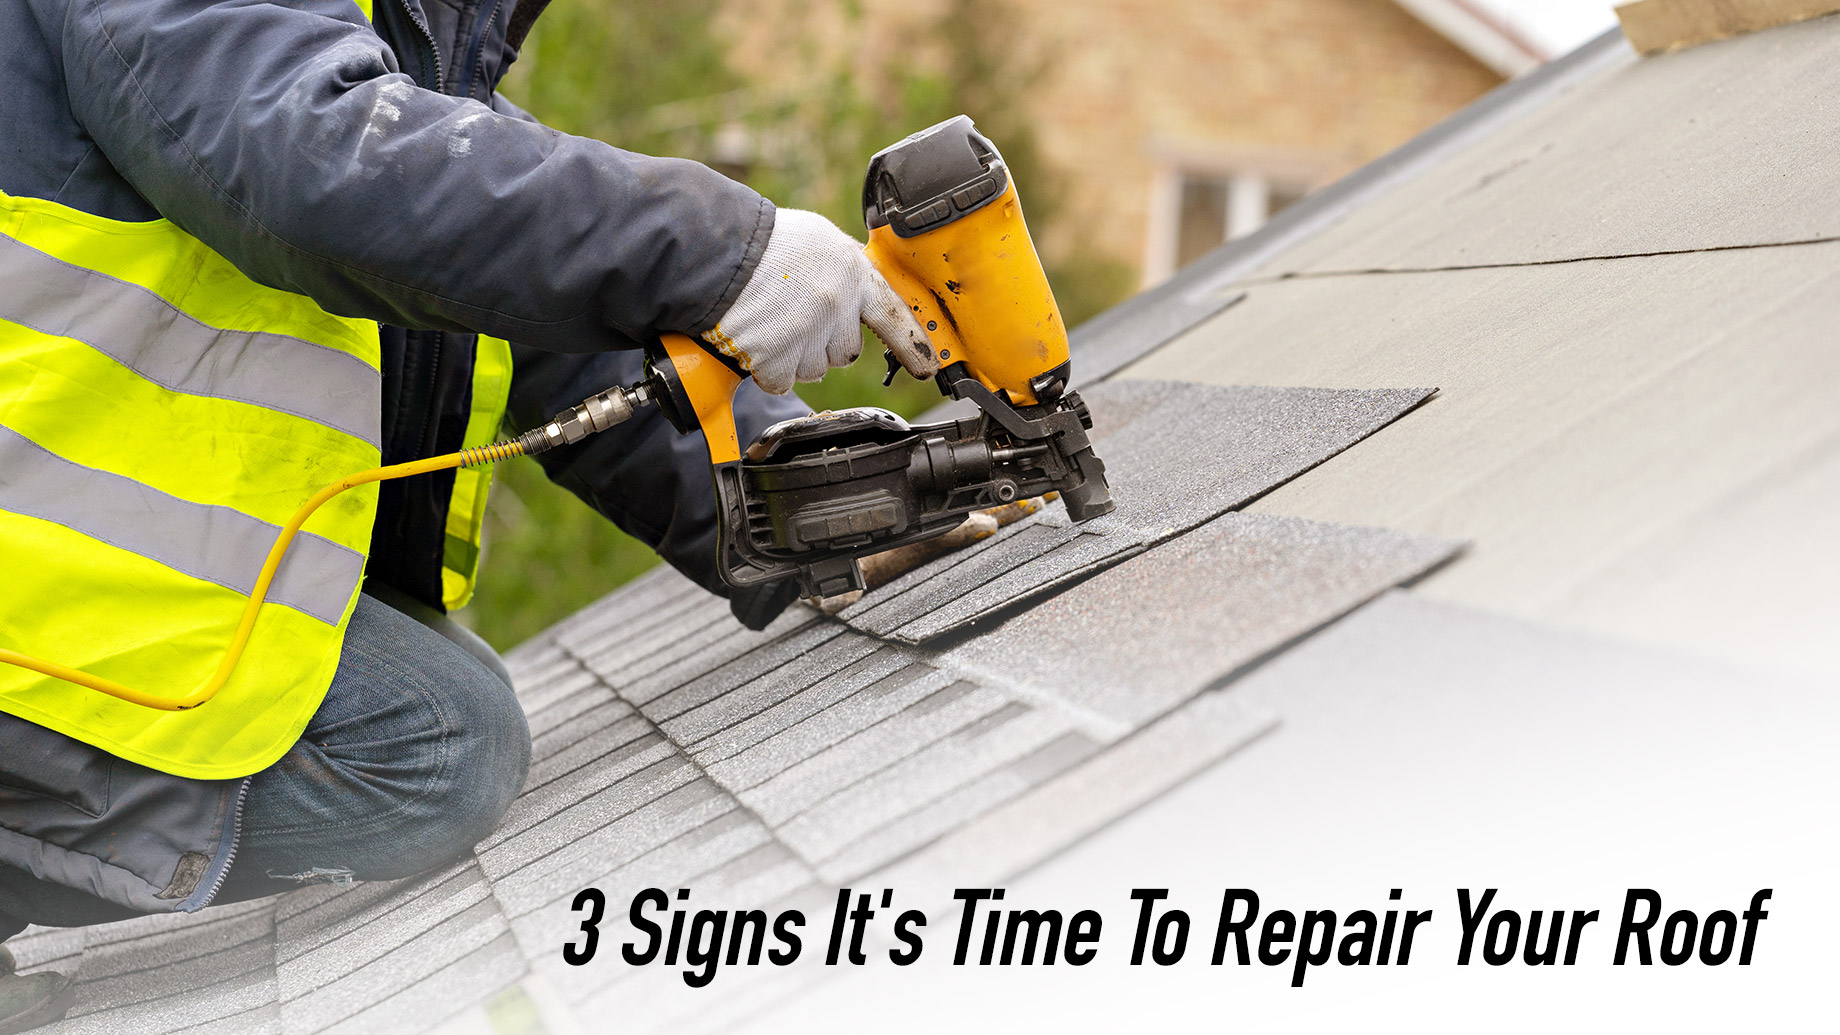 3 Signs It's Time To Repair Your Roof